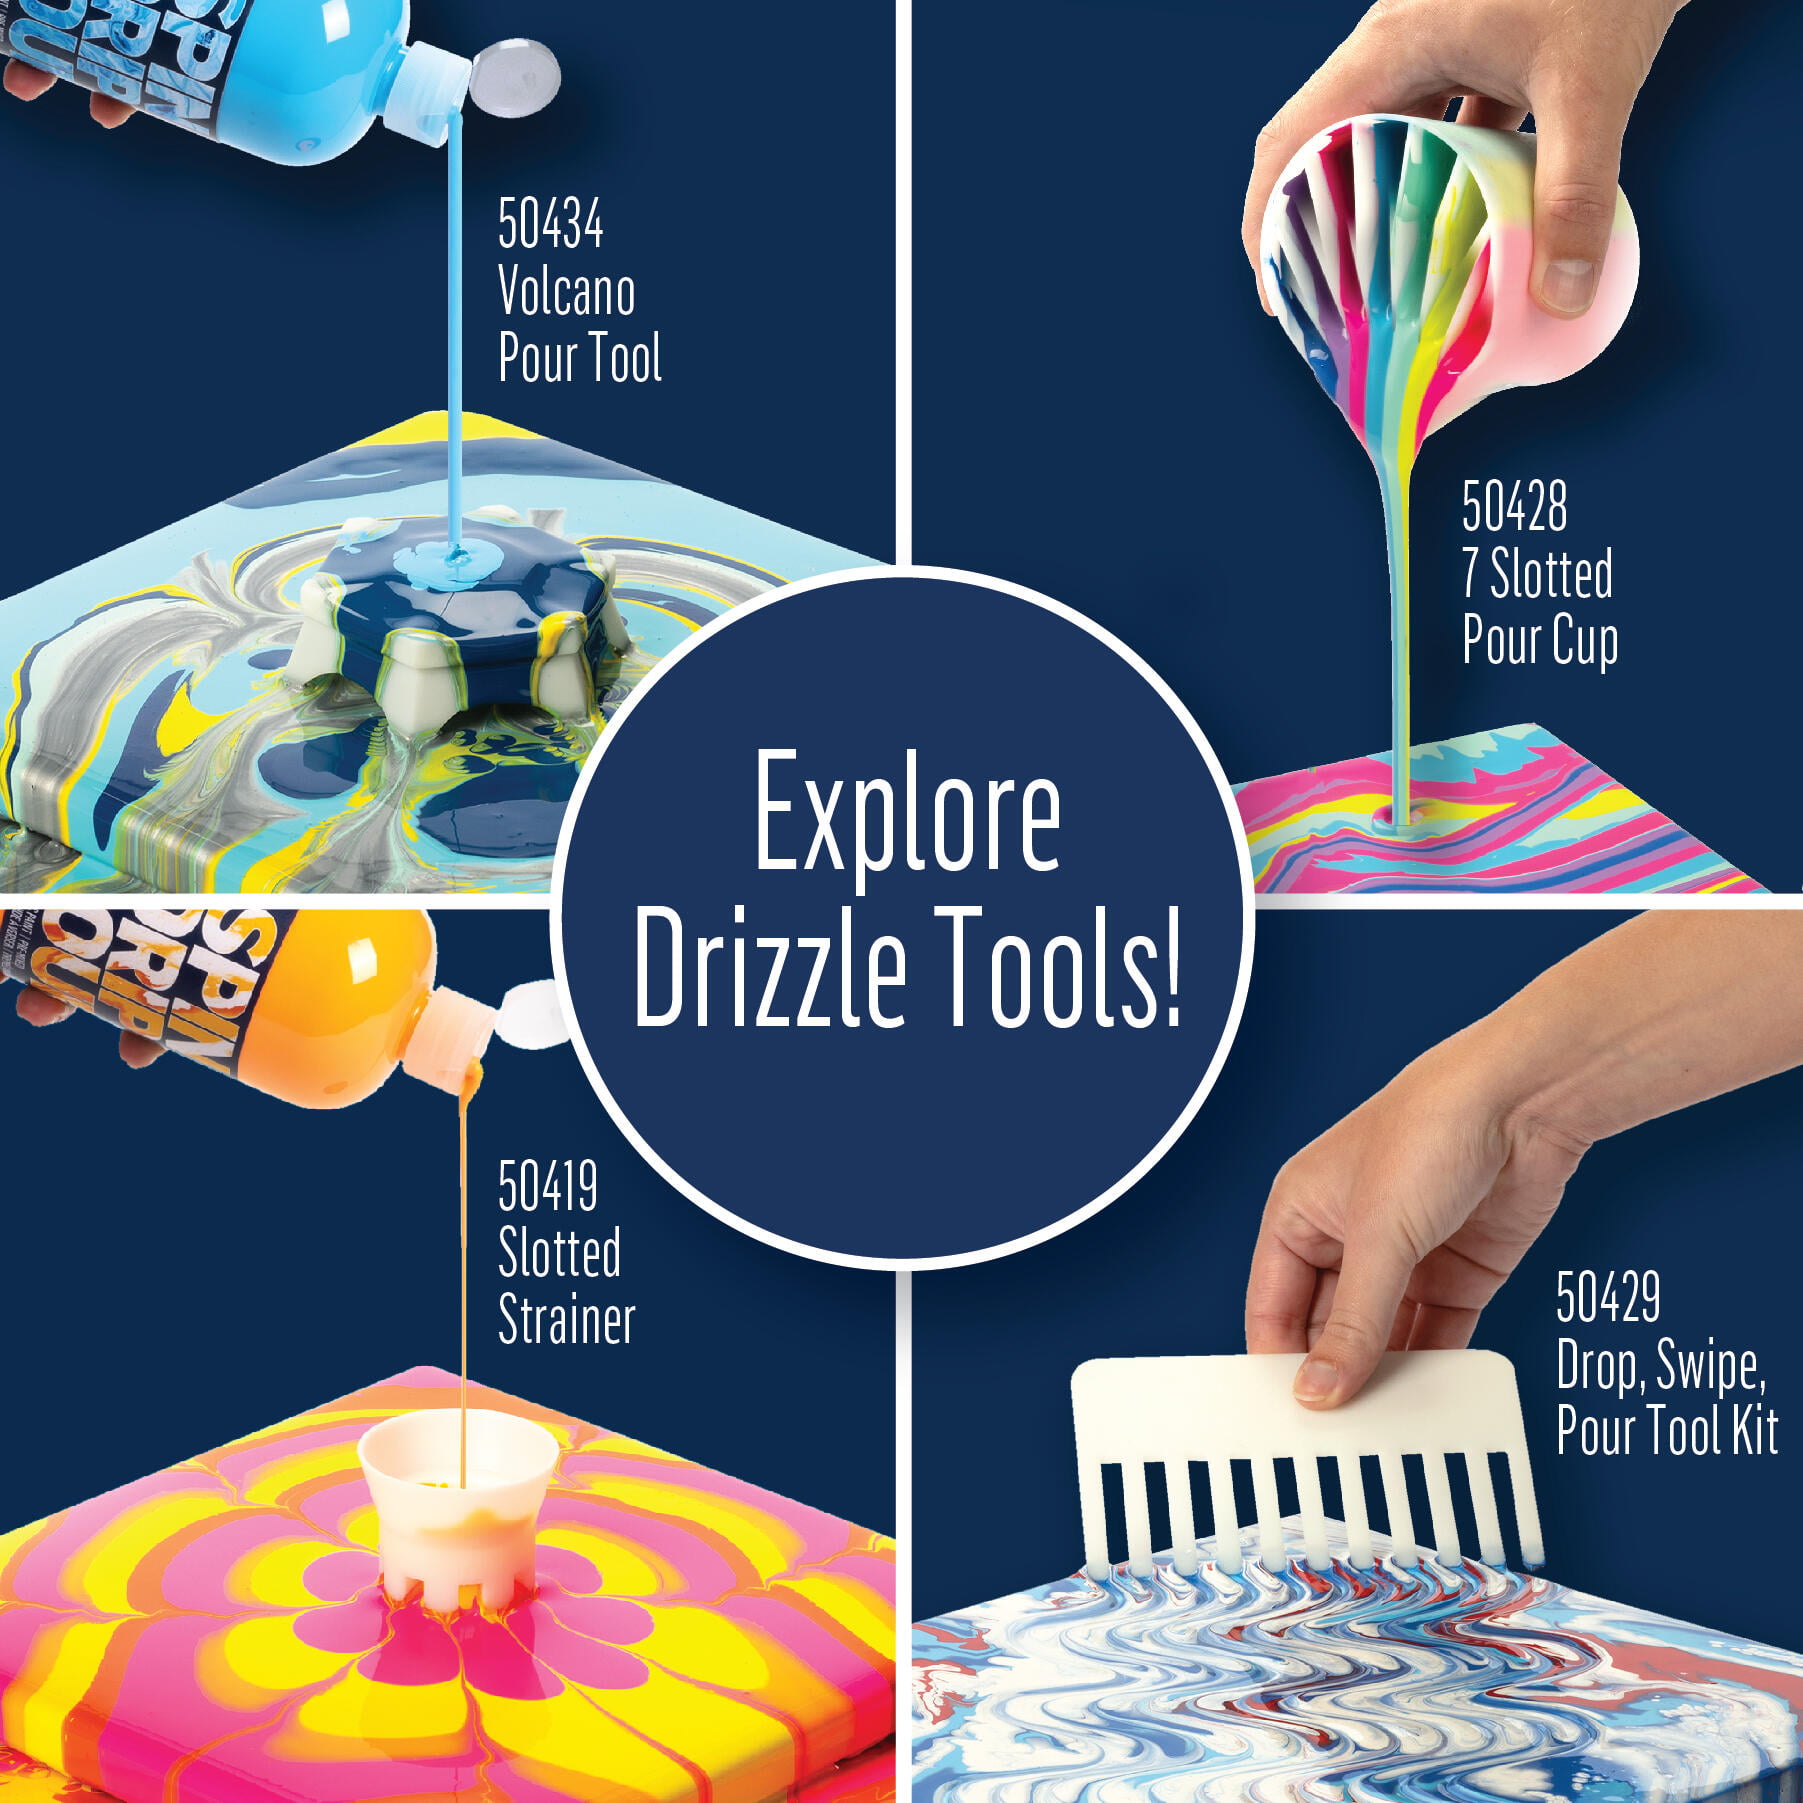 FolkArt Drizzle Product Resources - Brand - DIY Craft Supplies